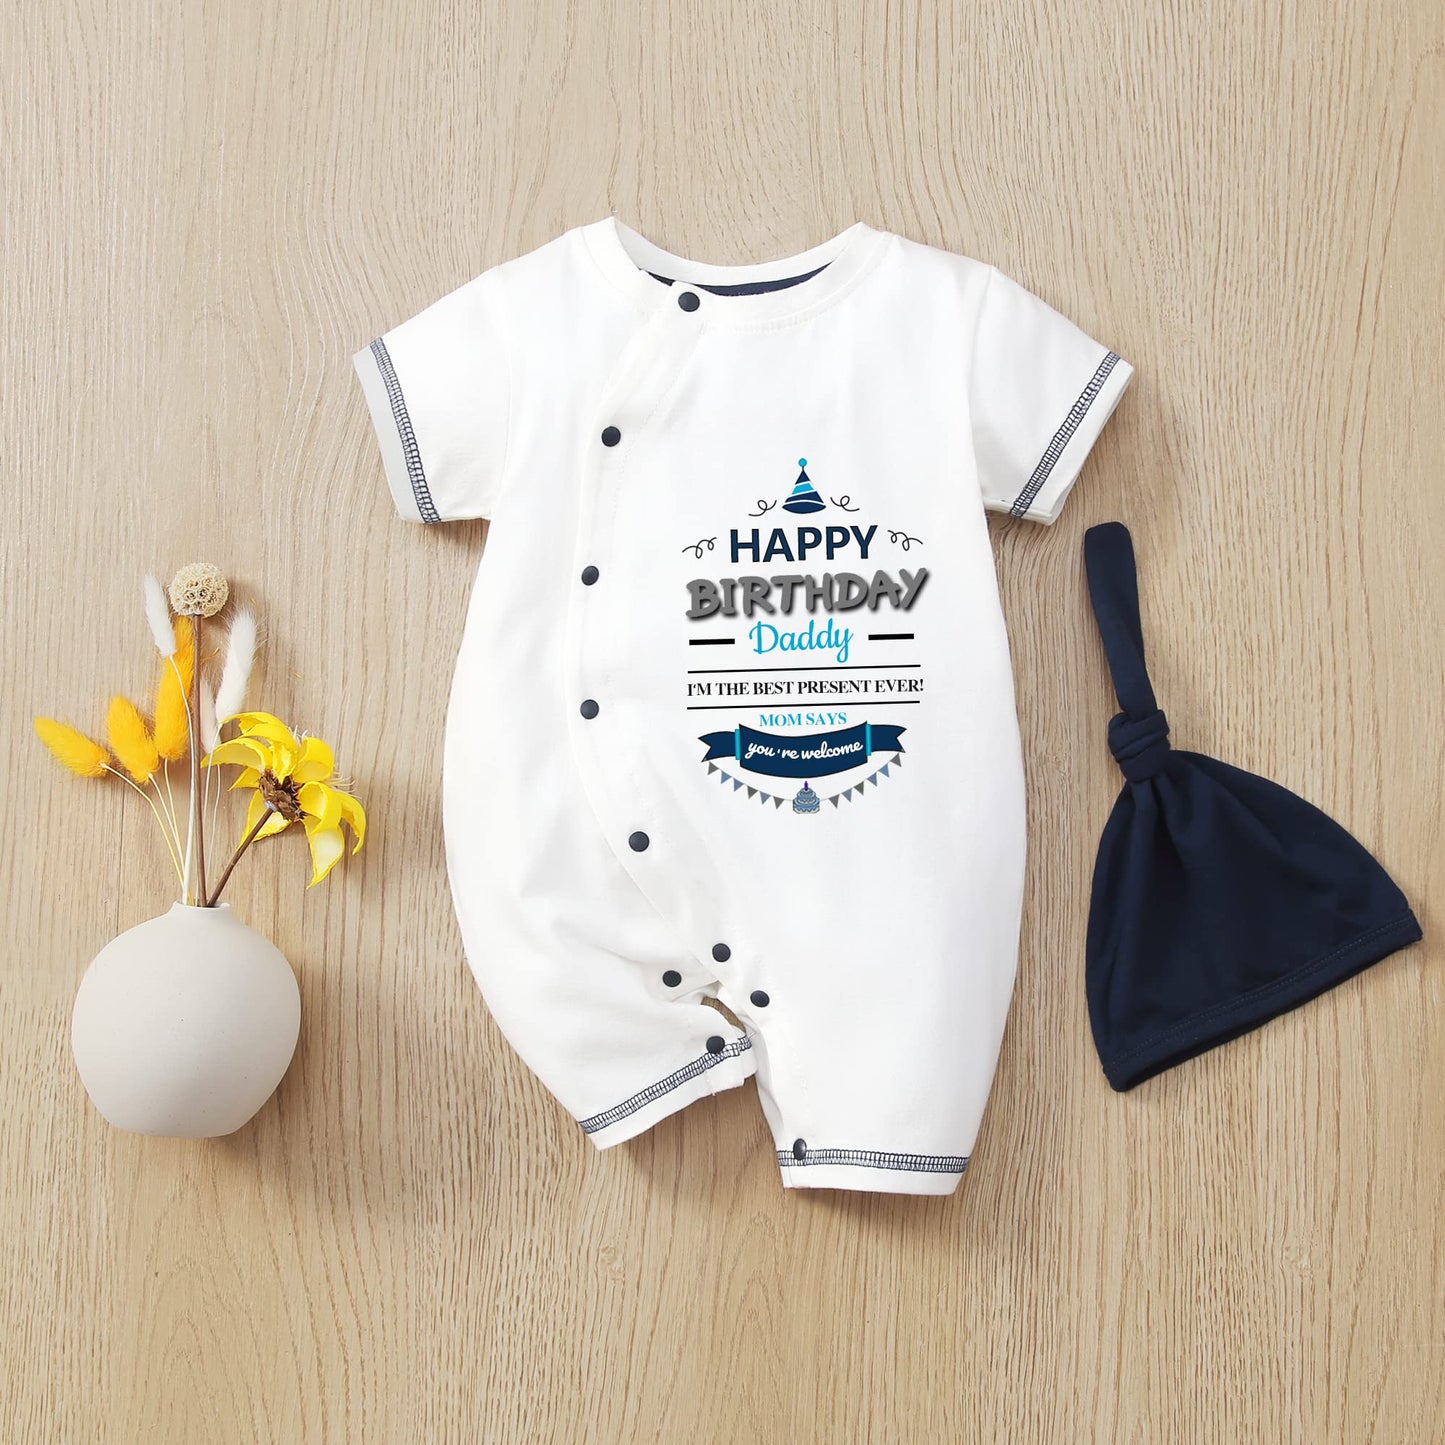 HTERDR Happy Birthday Daddy Mommy Baby Boys Girls Romper Bodysuit Infant Funny Letter Jumpsuit Outfit 12-24Months